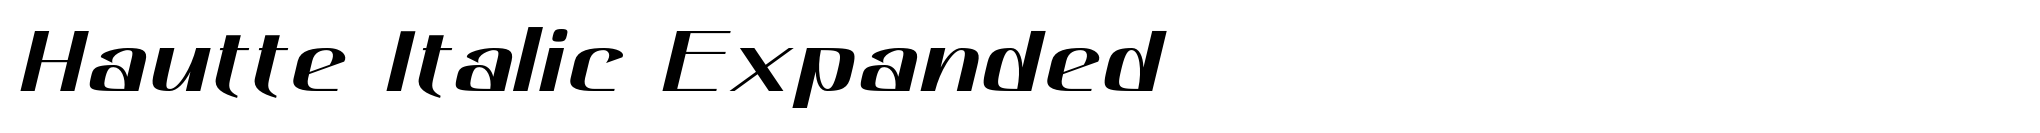 Hautte Italic Expanded image